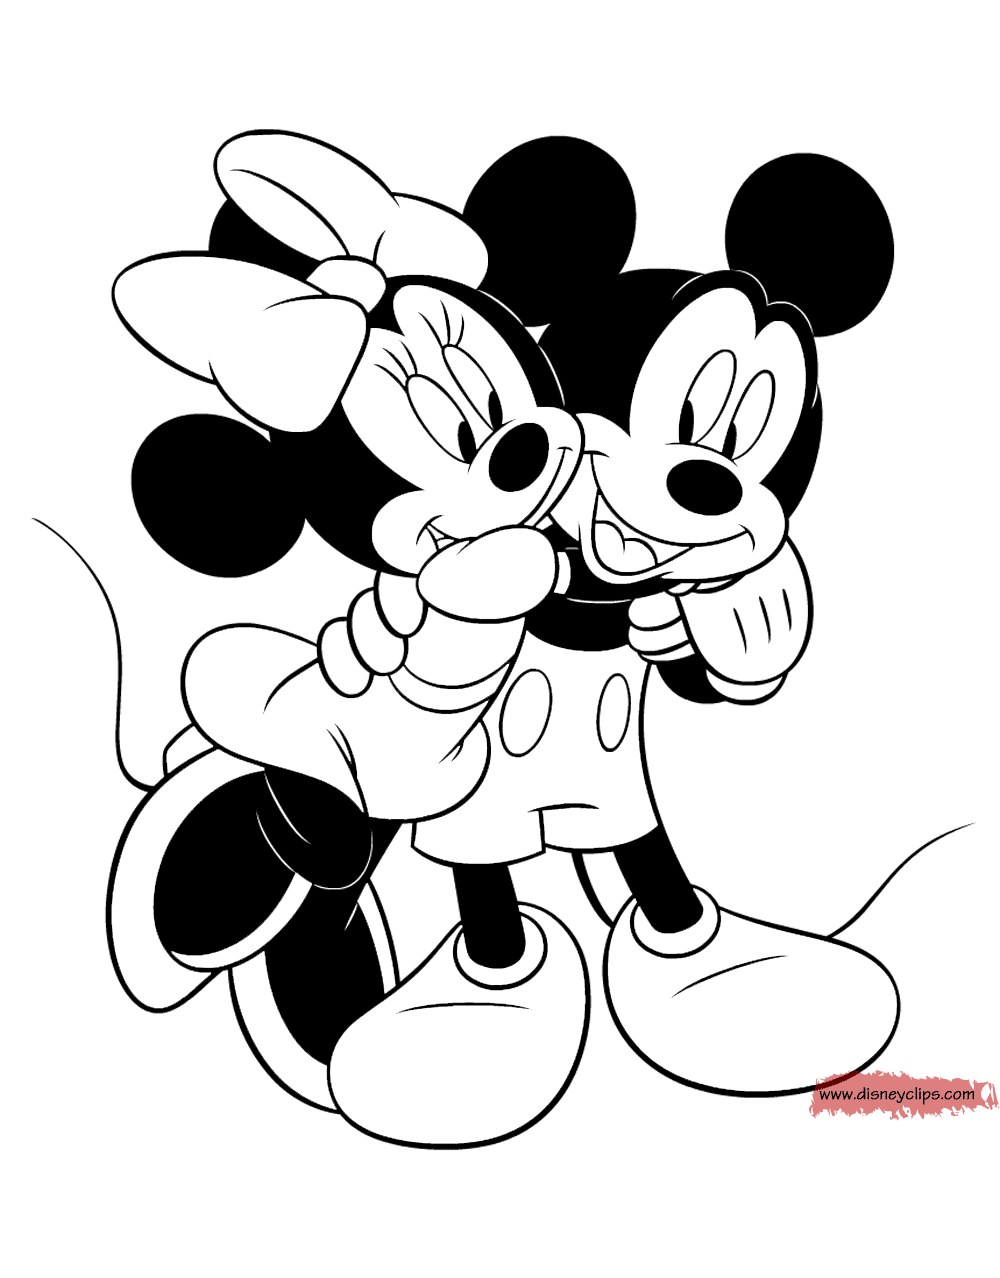 Mickey kissing Minnie coloring page Mickey Minnie hugging